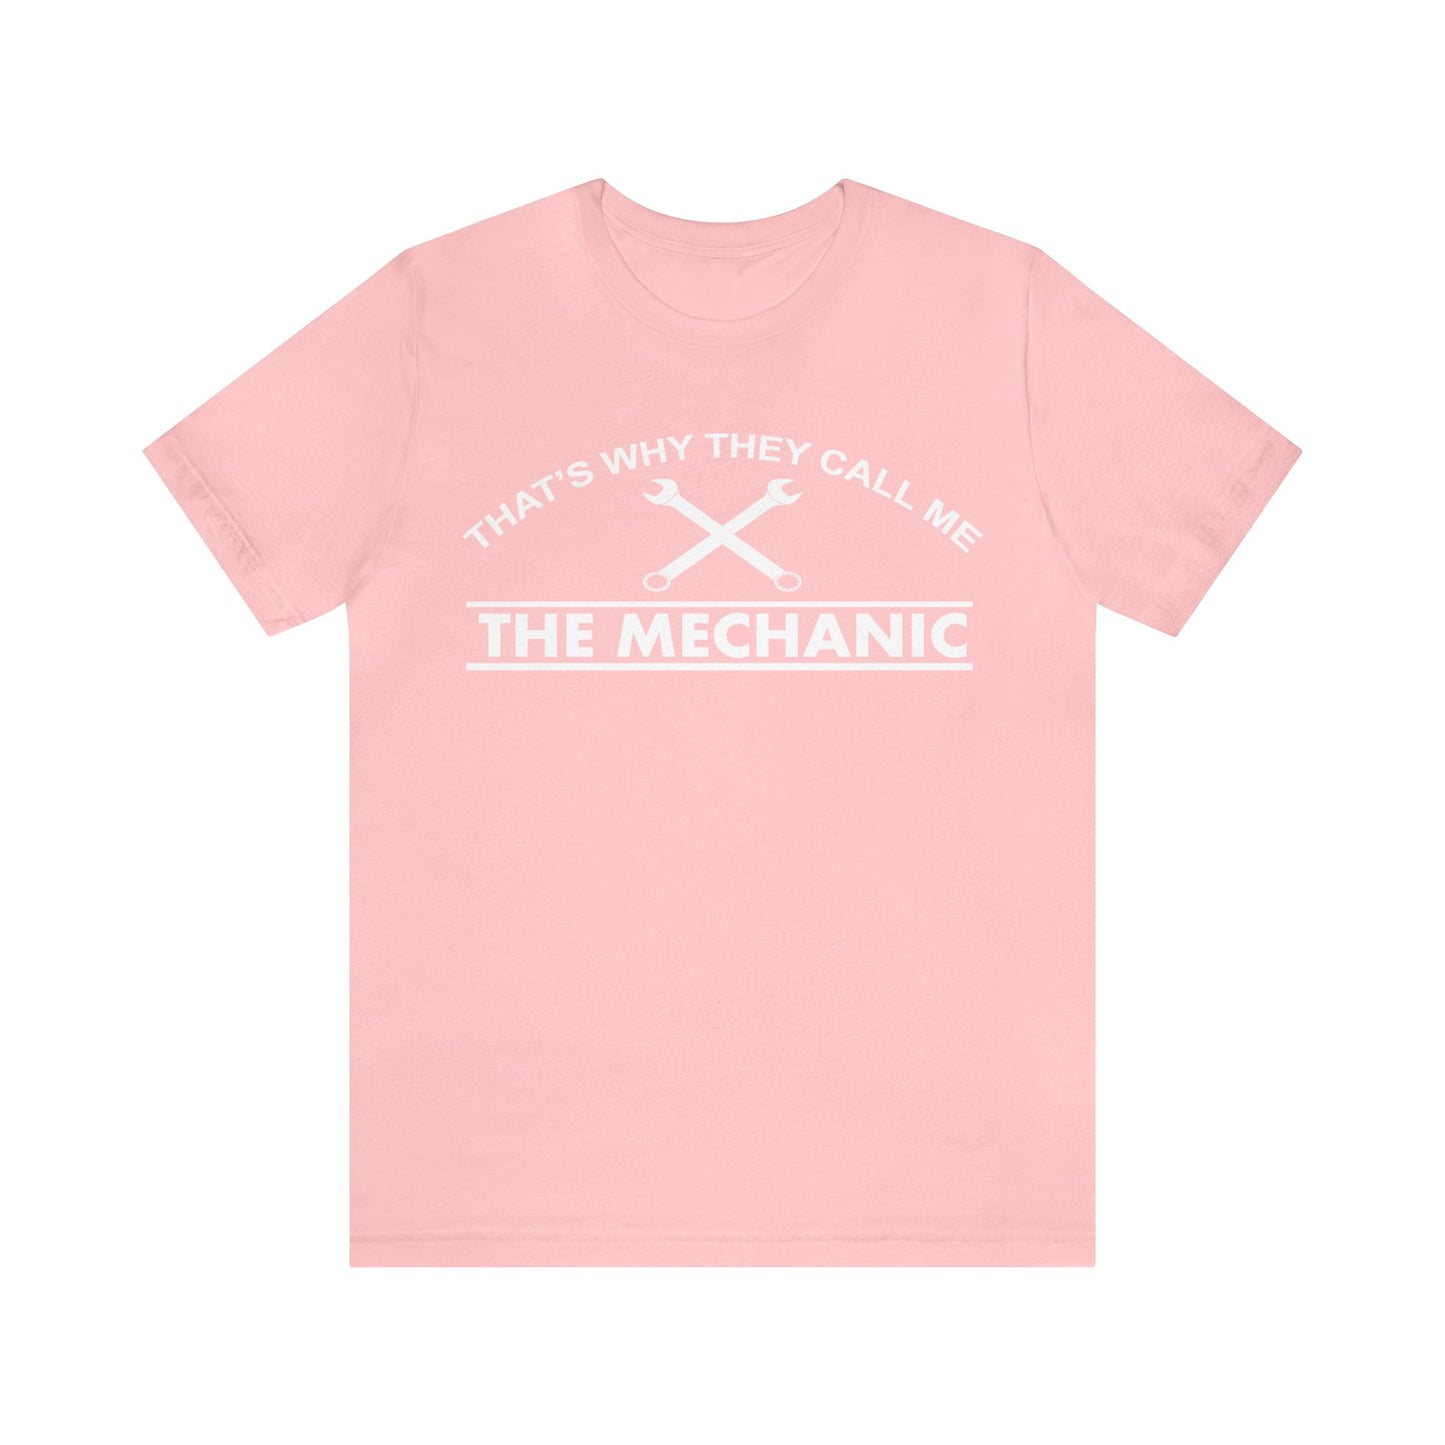 Unleash Your Inner Mechanic with our Exclusive 'That's Why They Call Me the Mechanic' T-Shirt